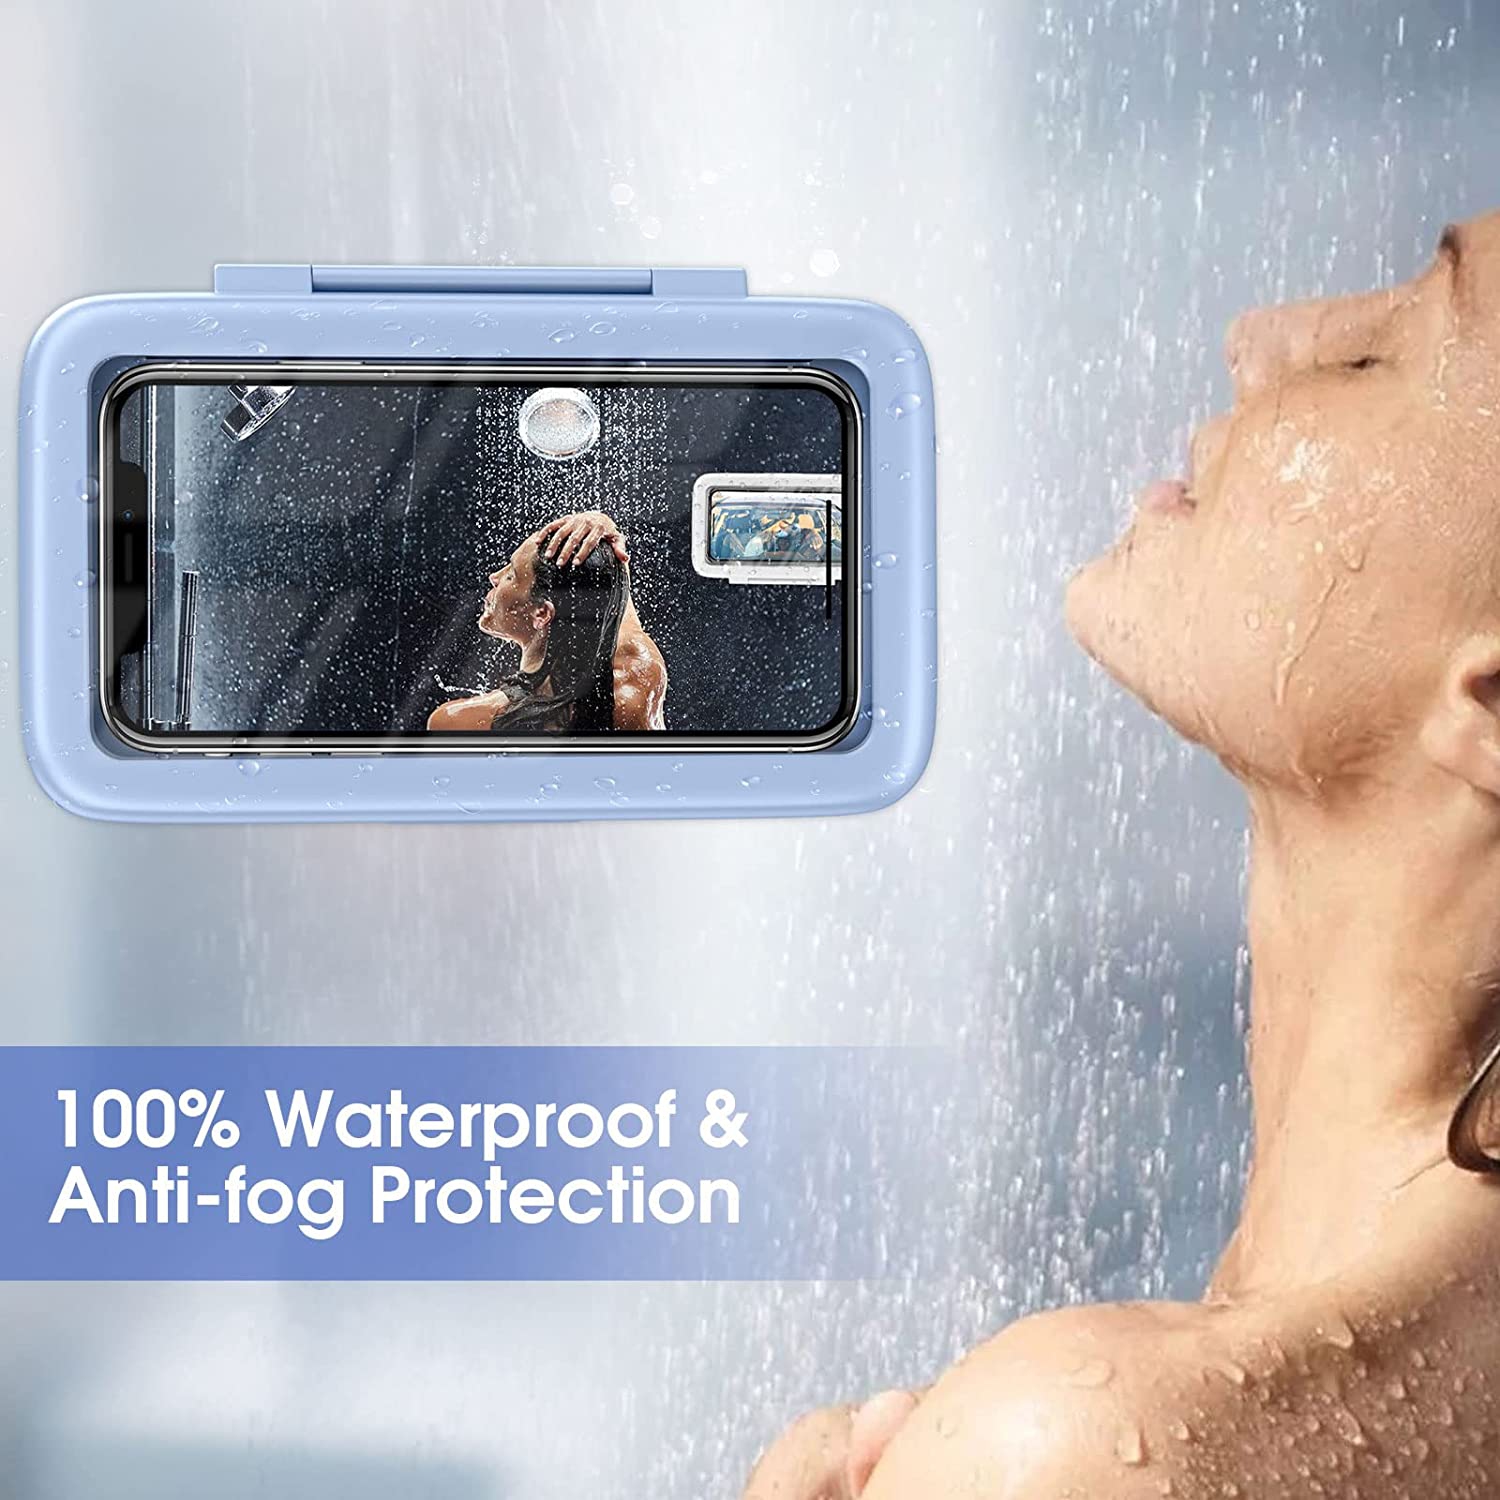 Wall Mounted Phone Case Waterproof Anti-Fog Touchable Phone Case Bathroom Phone Case Shower Phone Holder No-Trace Hanging Phone Box, Size: 10.5, Blue